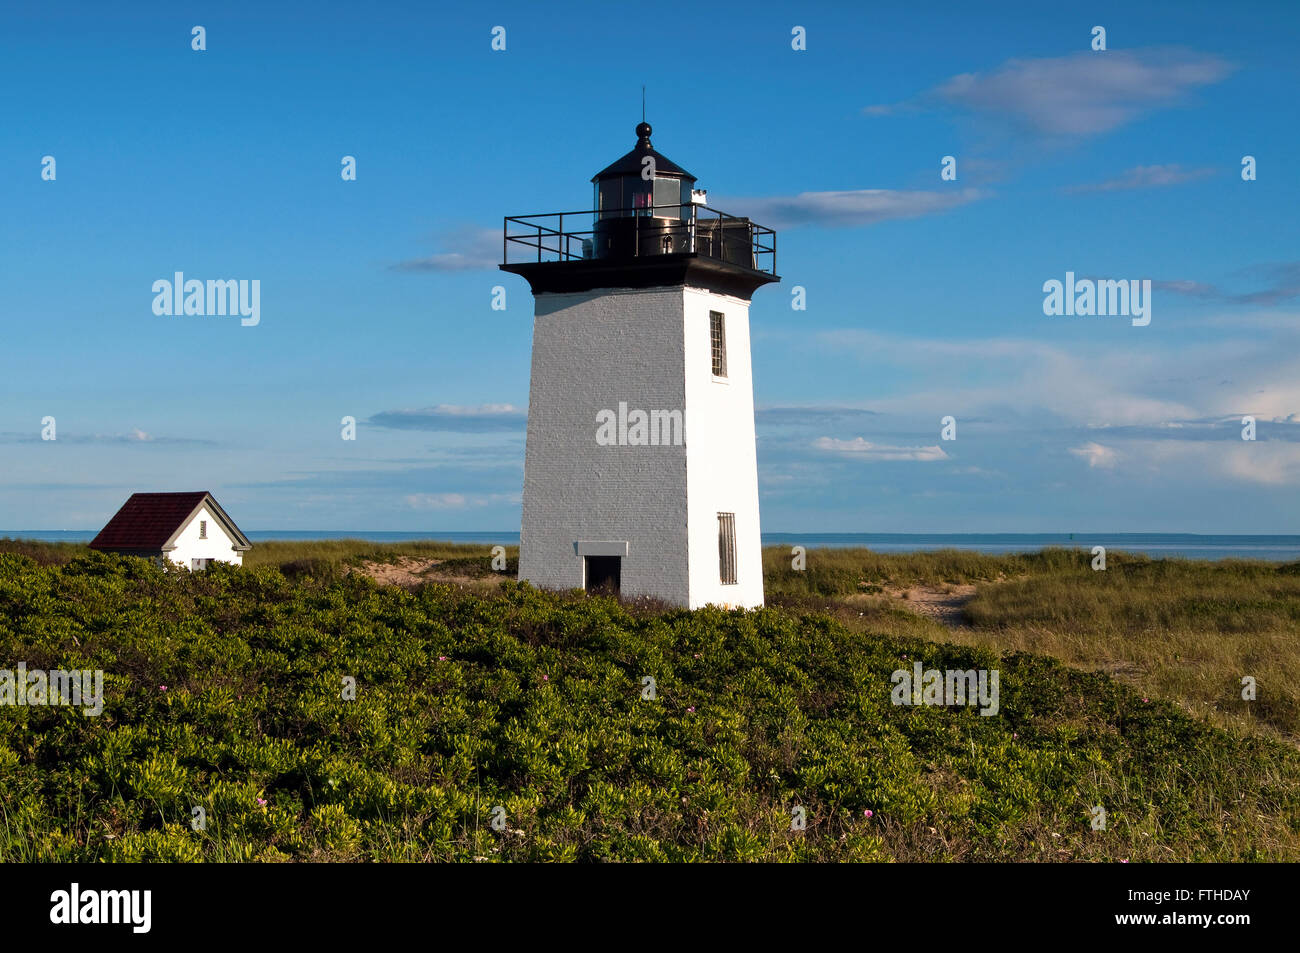 Wood End Lighthouse is a popular attraction for tourists, located at the end of Cape Cod, in Provincetown, Massachusetts. Stock Photo